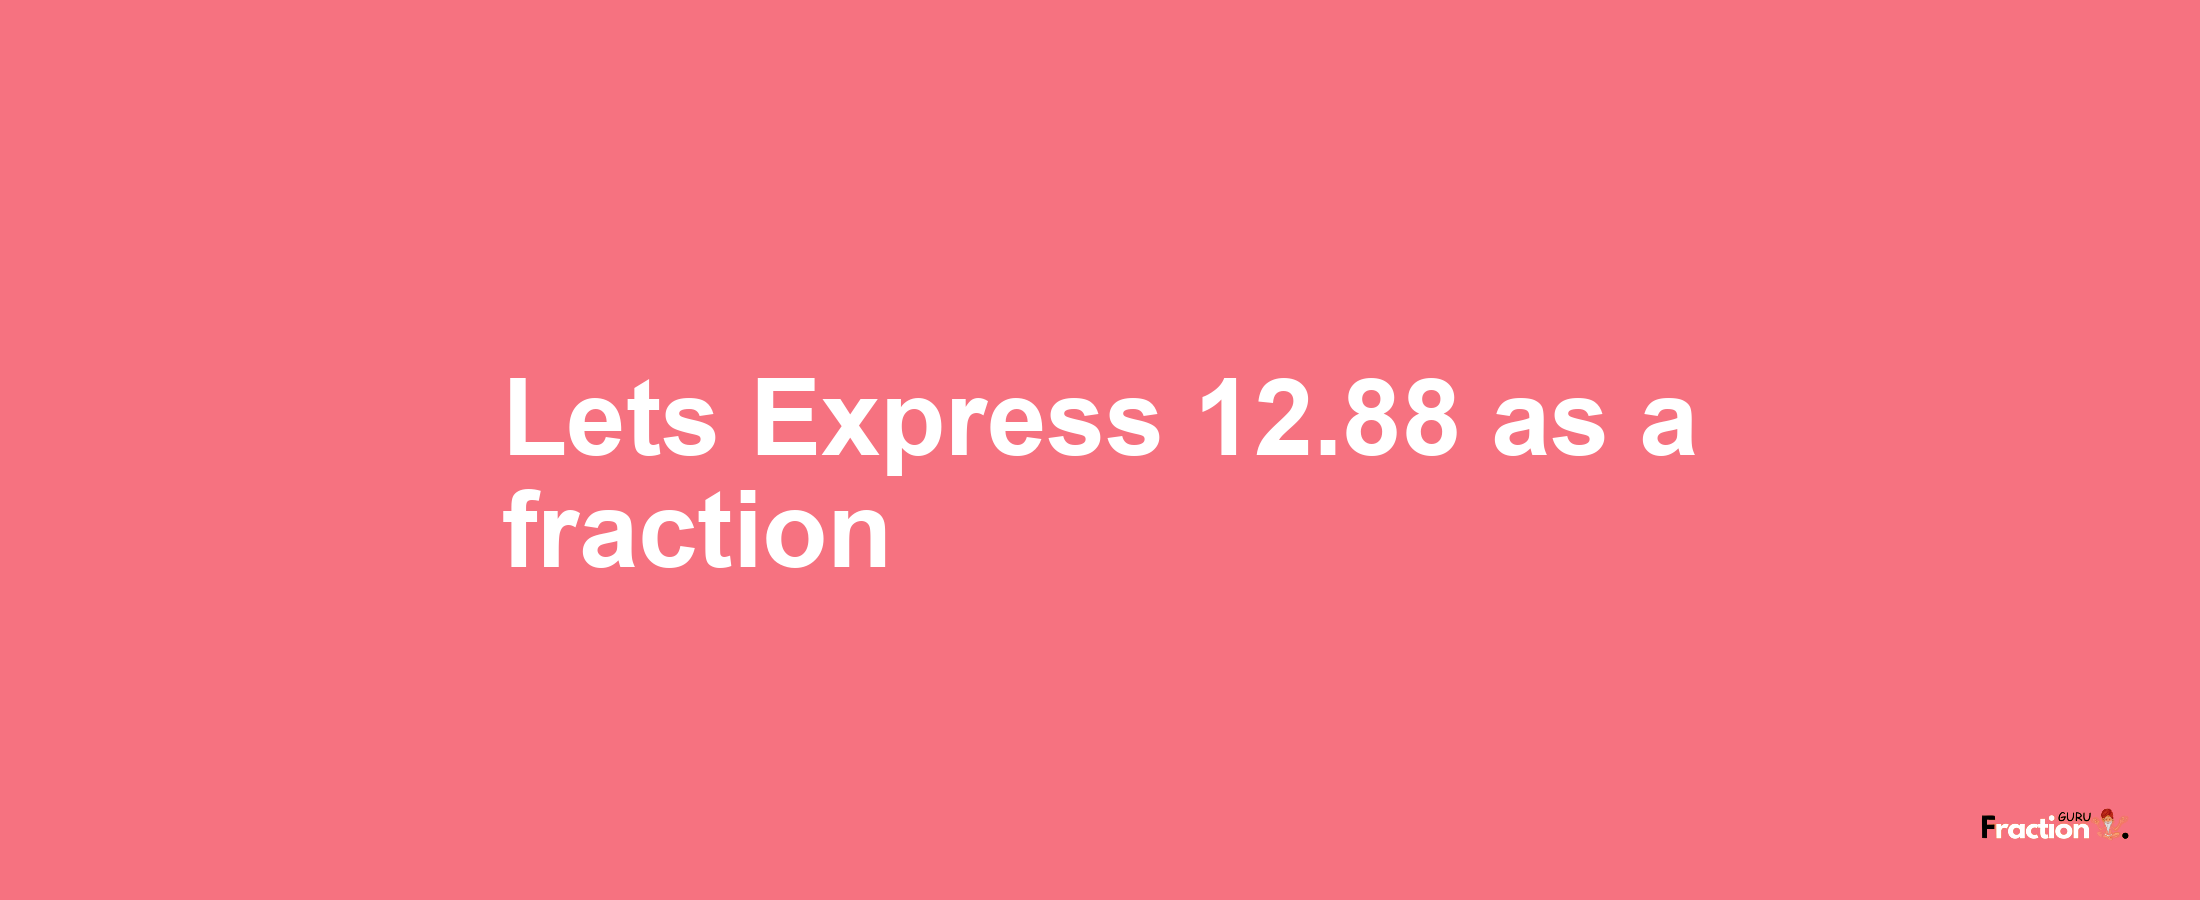 Lets Express 12.88 as afraction